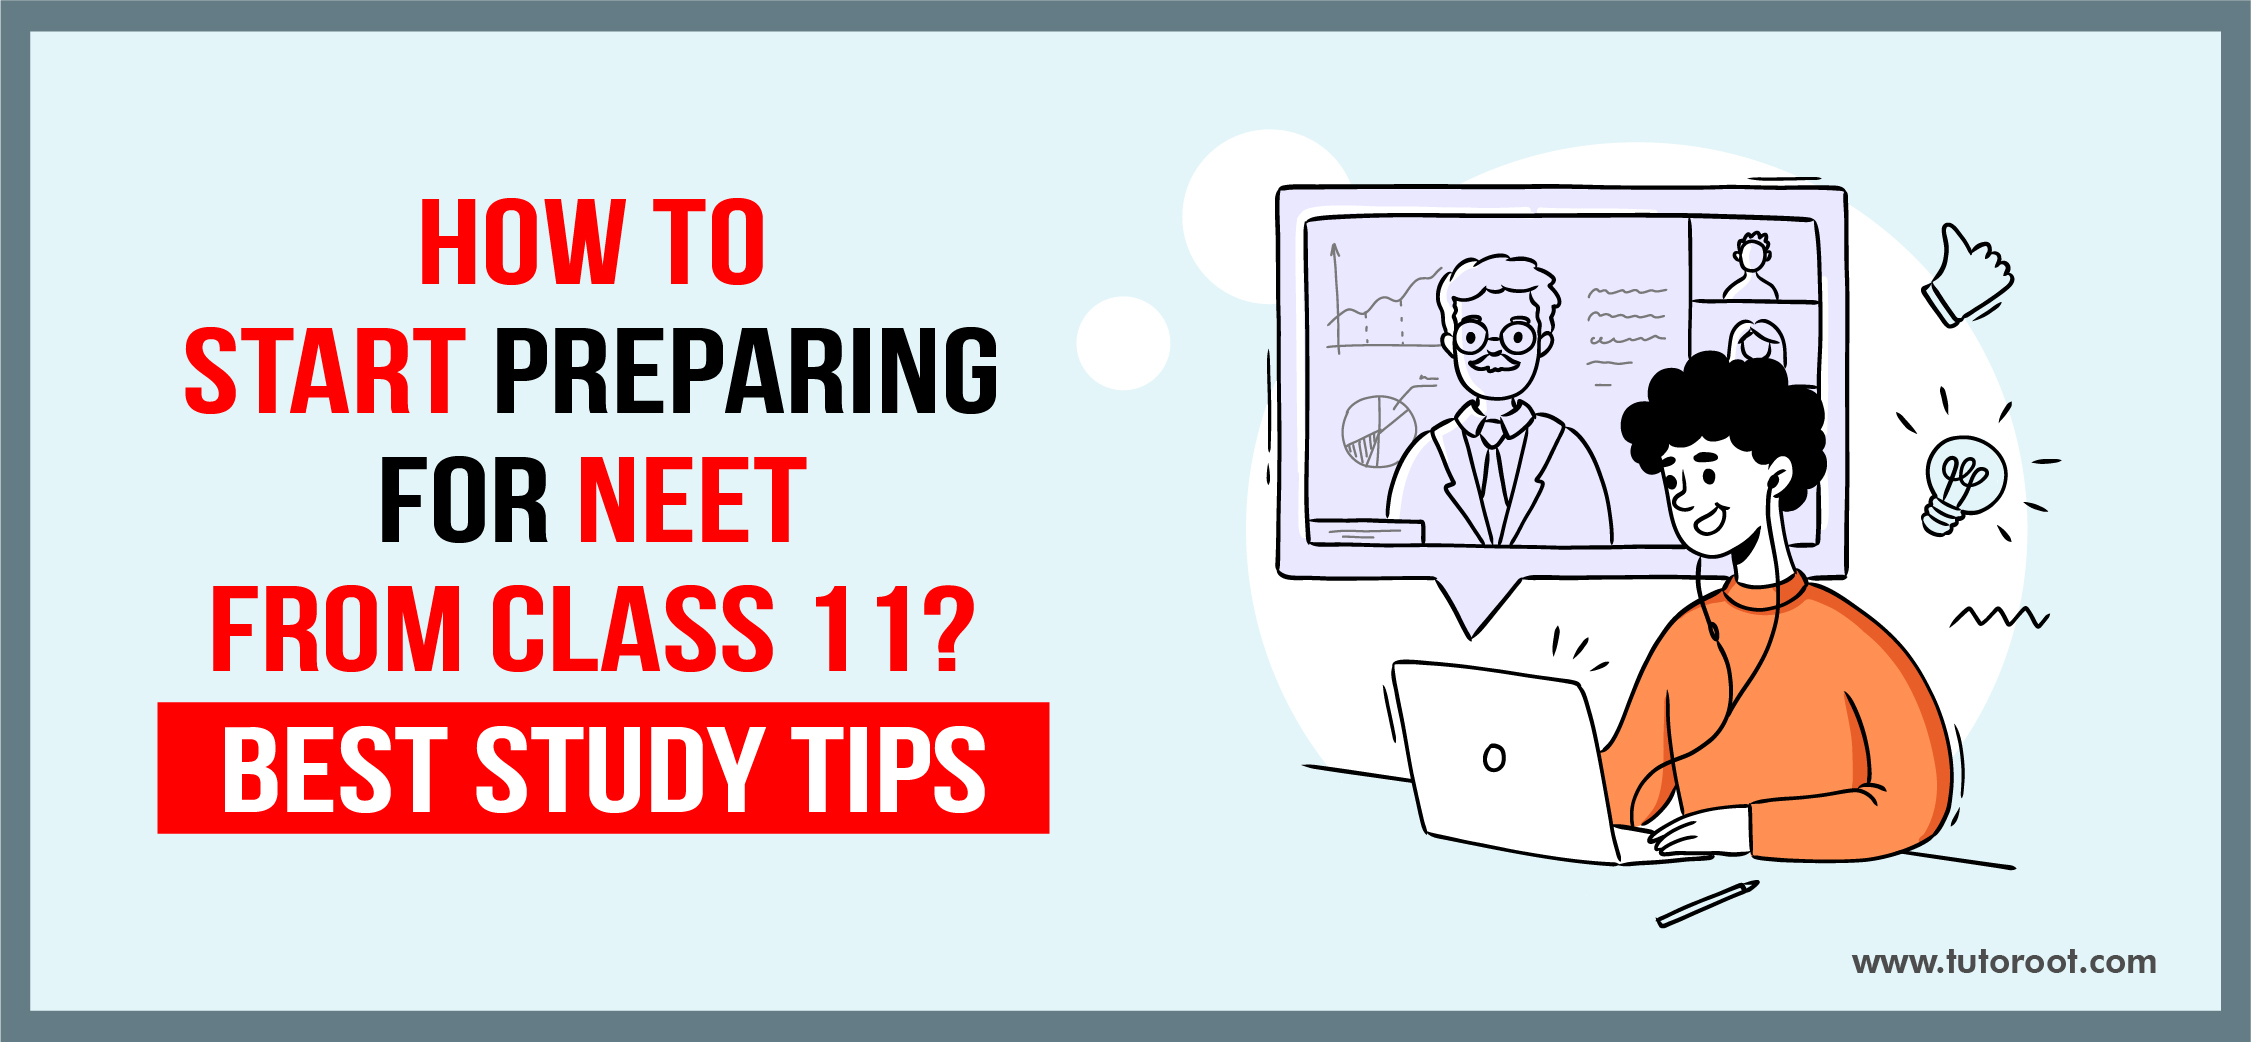 How_to_Start_Preparing_for_NEET_from_Class_11_Best_Study_Tips